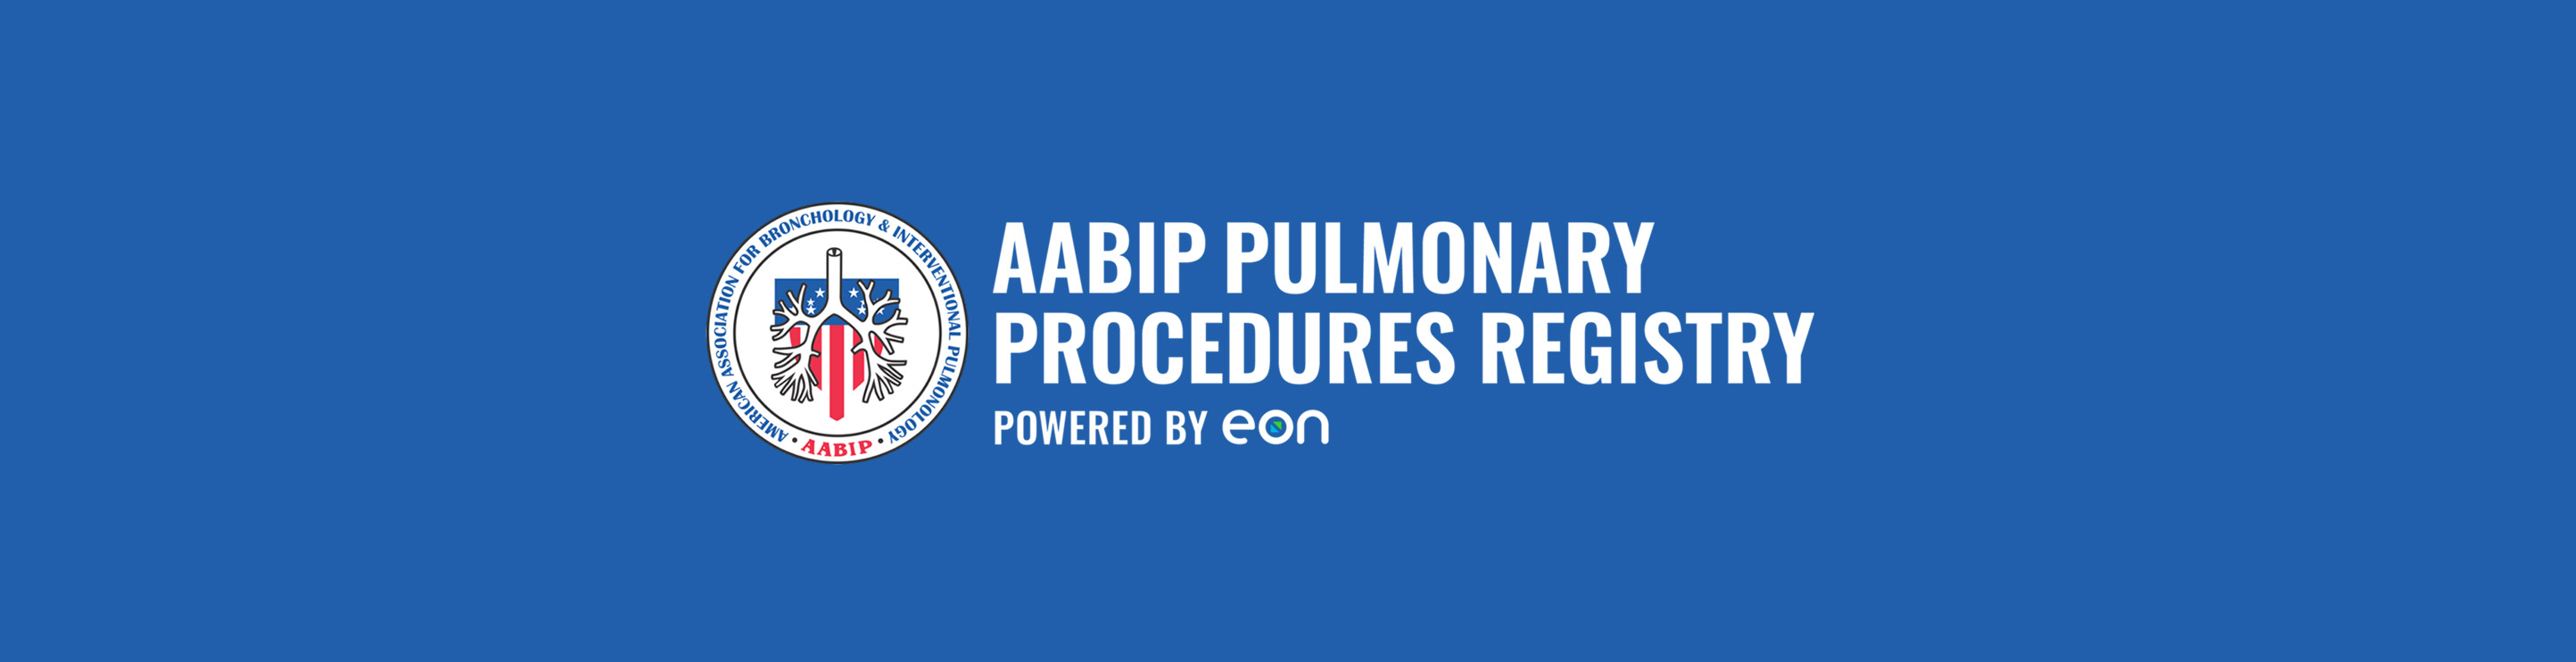 The AABIP Pulmonary Procedures Registry is expected to improve clinical outcomes